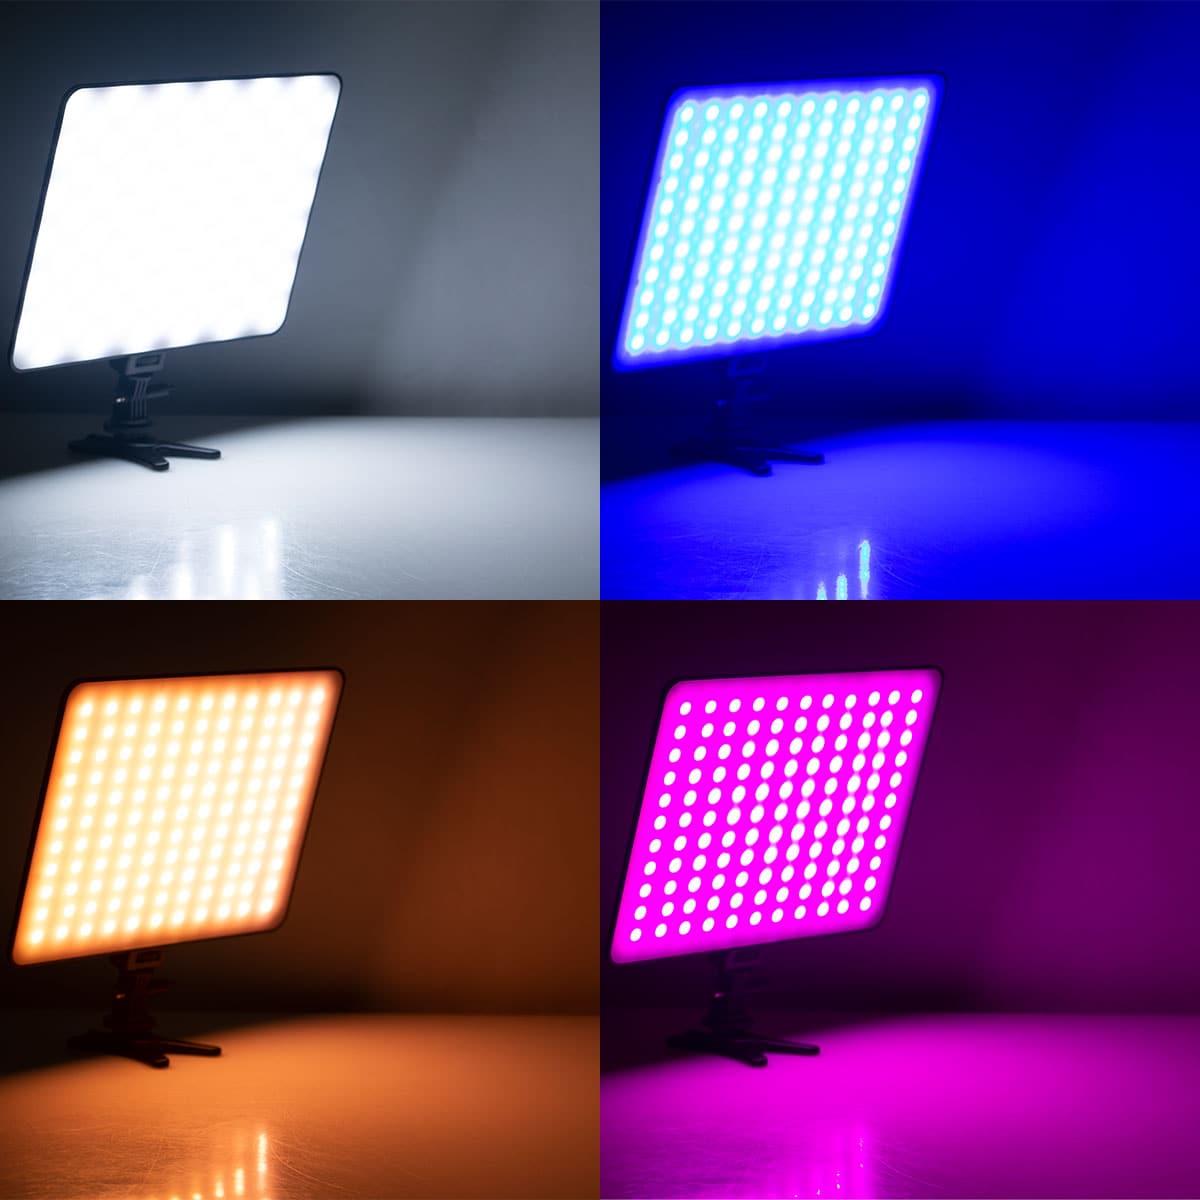 Weeylite sprite 20 RGB LED Panel 30W Full Color CRI 95+ for Gaming Streaming YouTube Broadcast  Web Conference Zoom 2500K-8500K  29 Scenes Mode